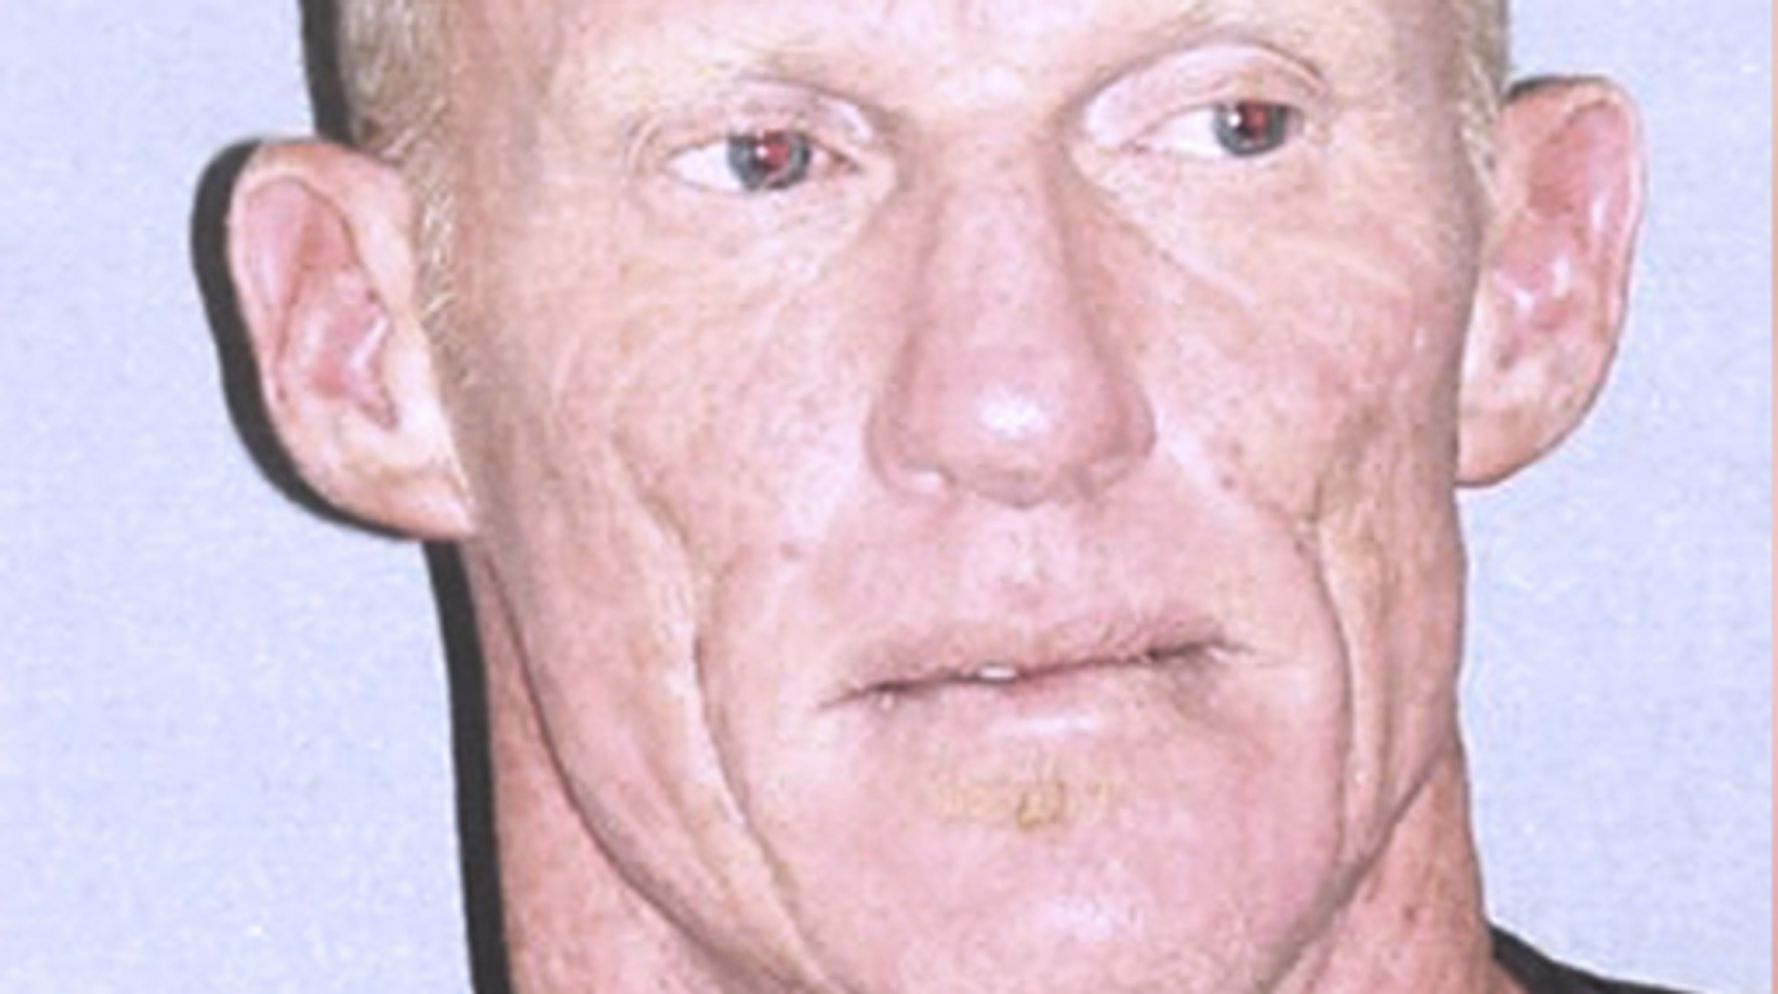 Ex-USC and Raiders QB Marinovich arrested naked with drugs